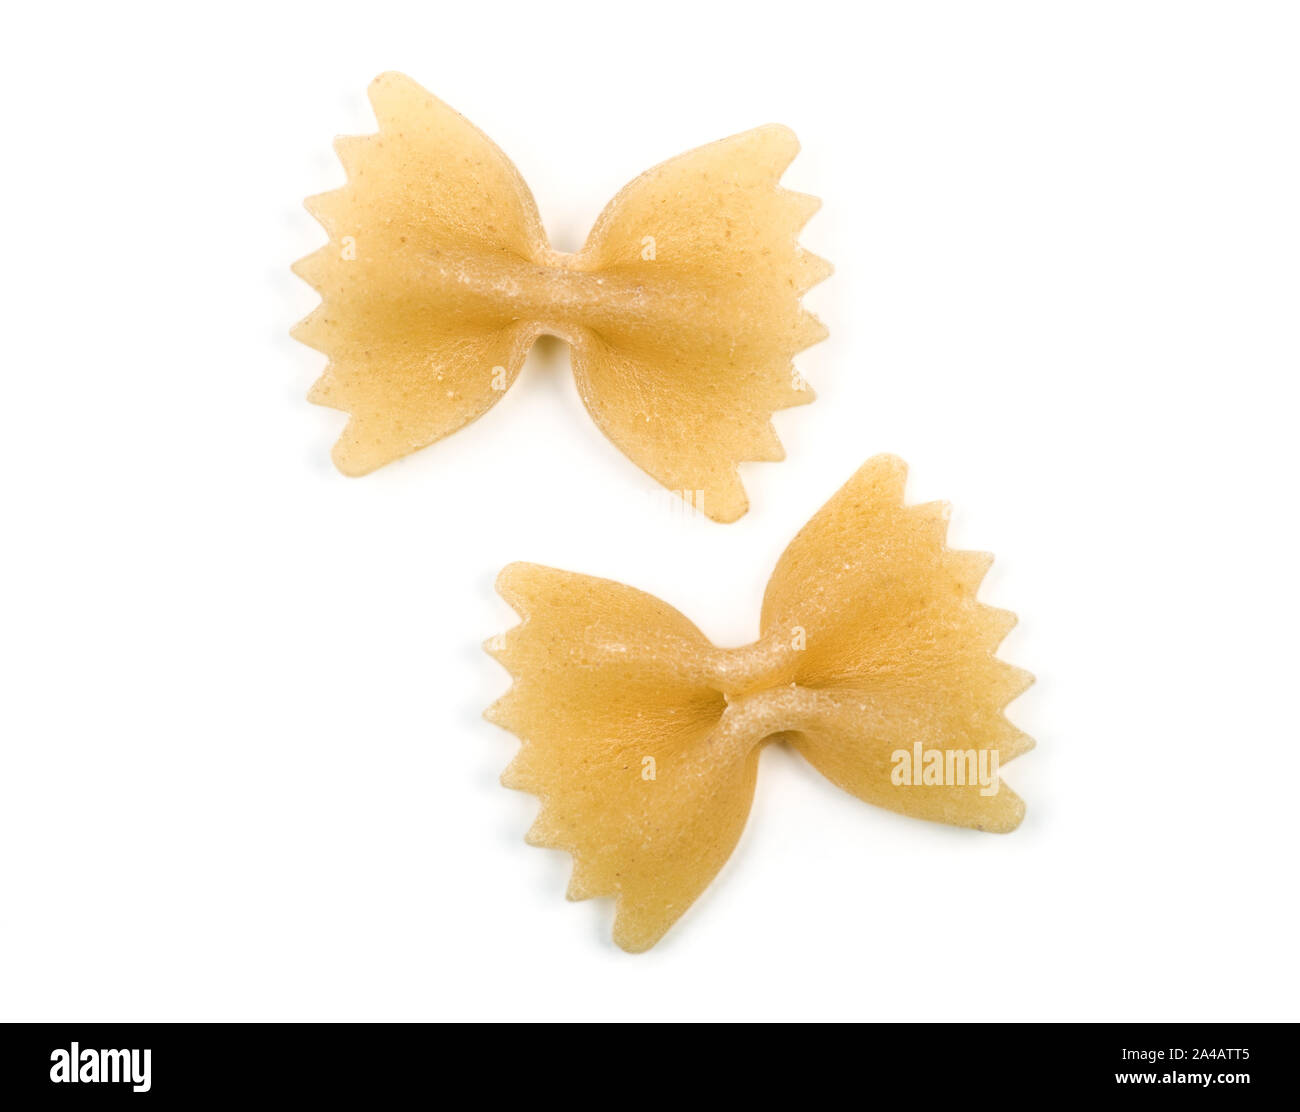 Farfalle italian bow tie shape pasta macro view two particles isolated on white background with clipping path Stock Photo